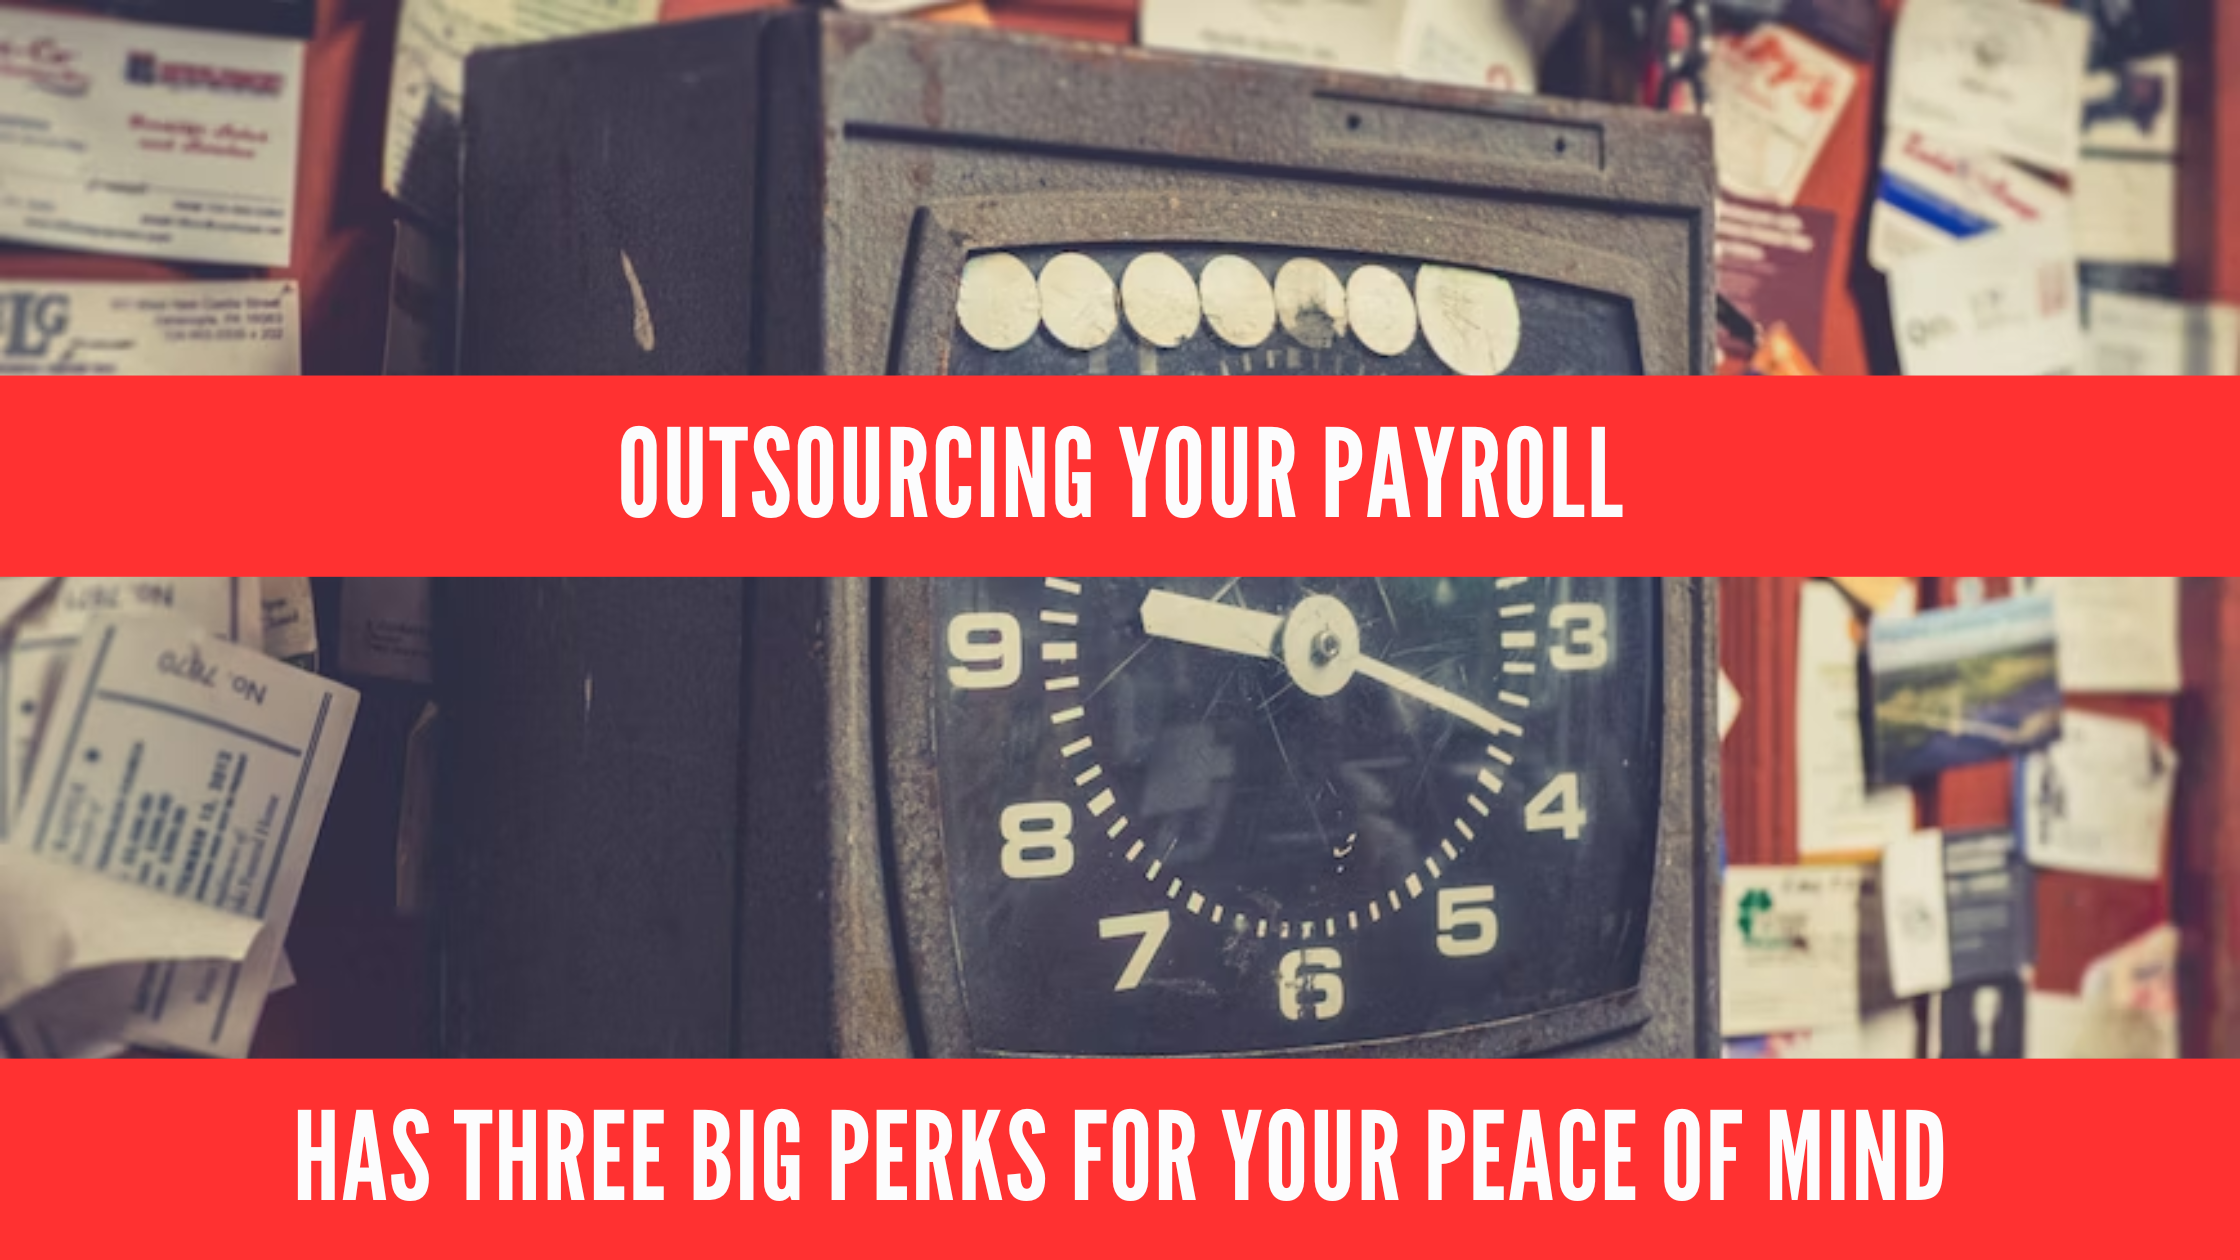 Outsourcing your payroll has three big perks for your peace of mind